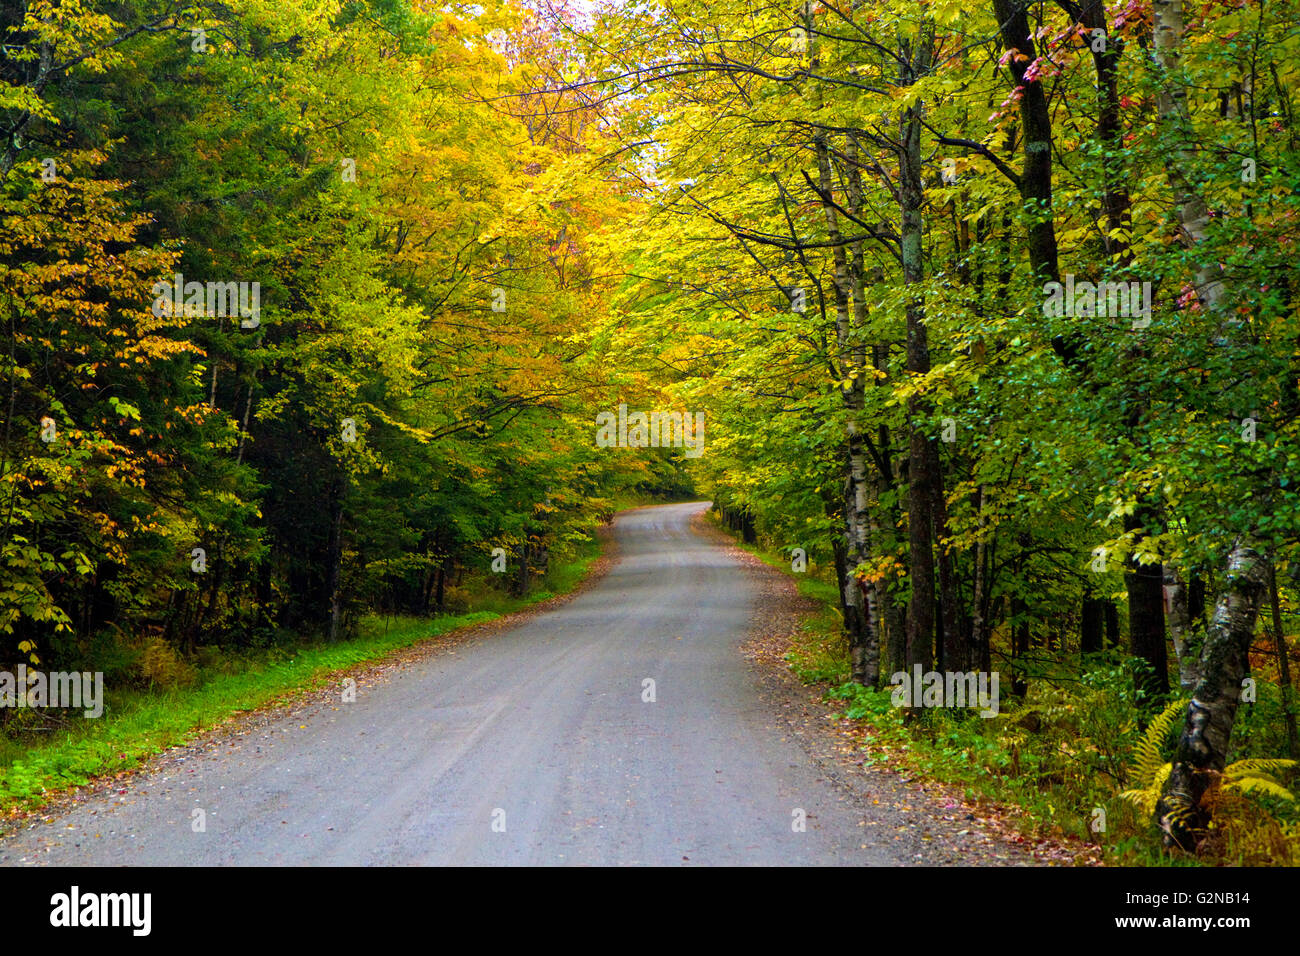 Fall foliage on a rural backroad near Stowe, Vermont, USA. Stock Photo